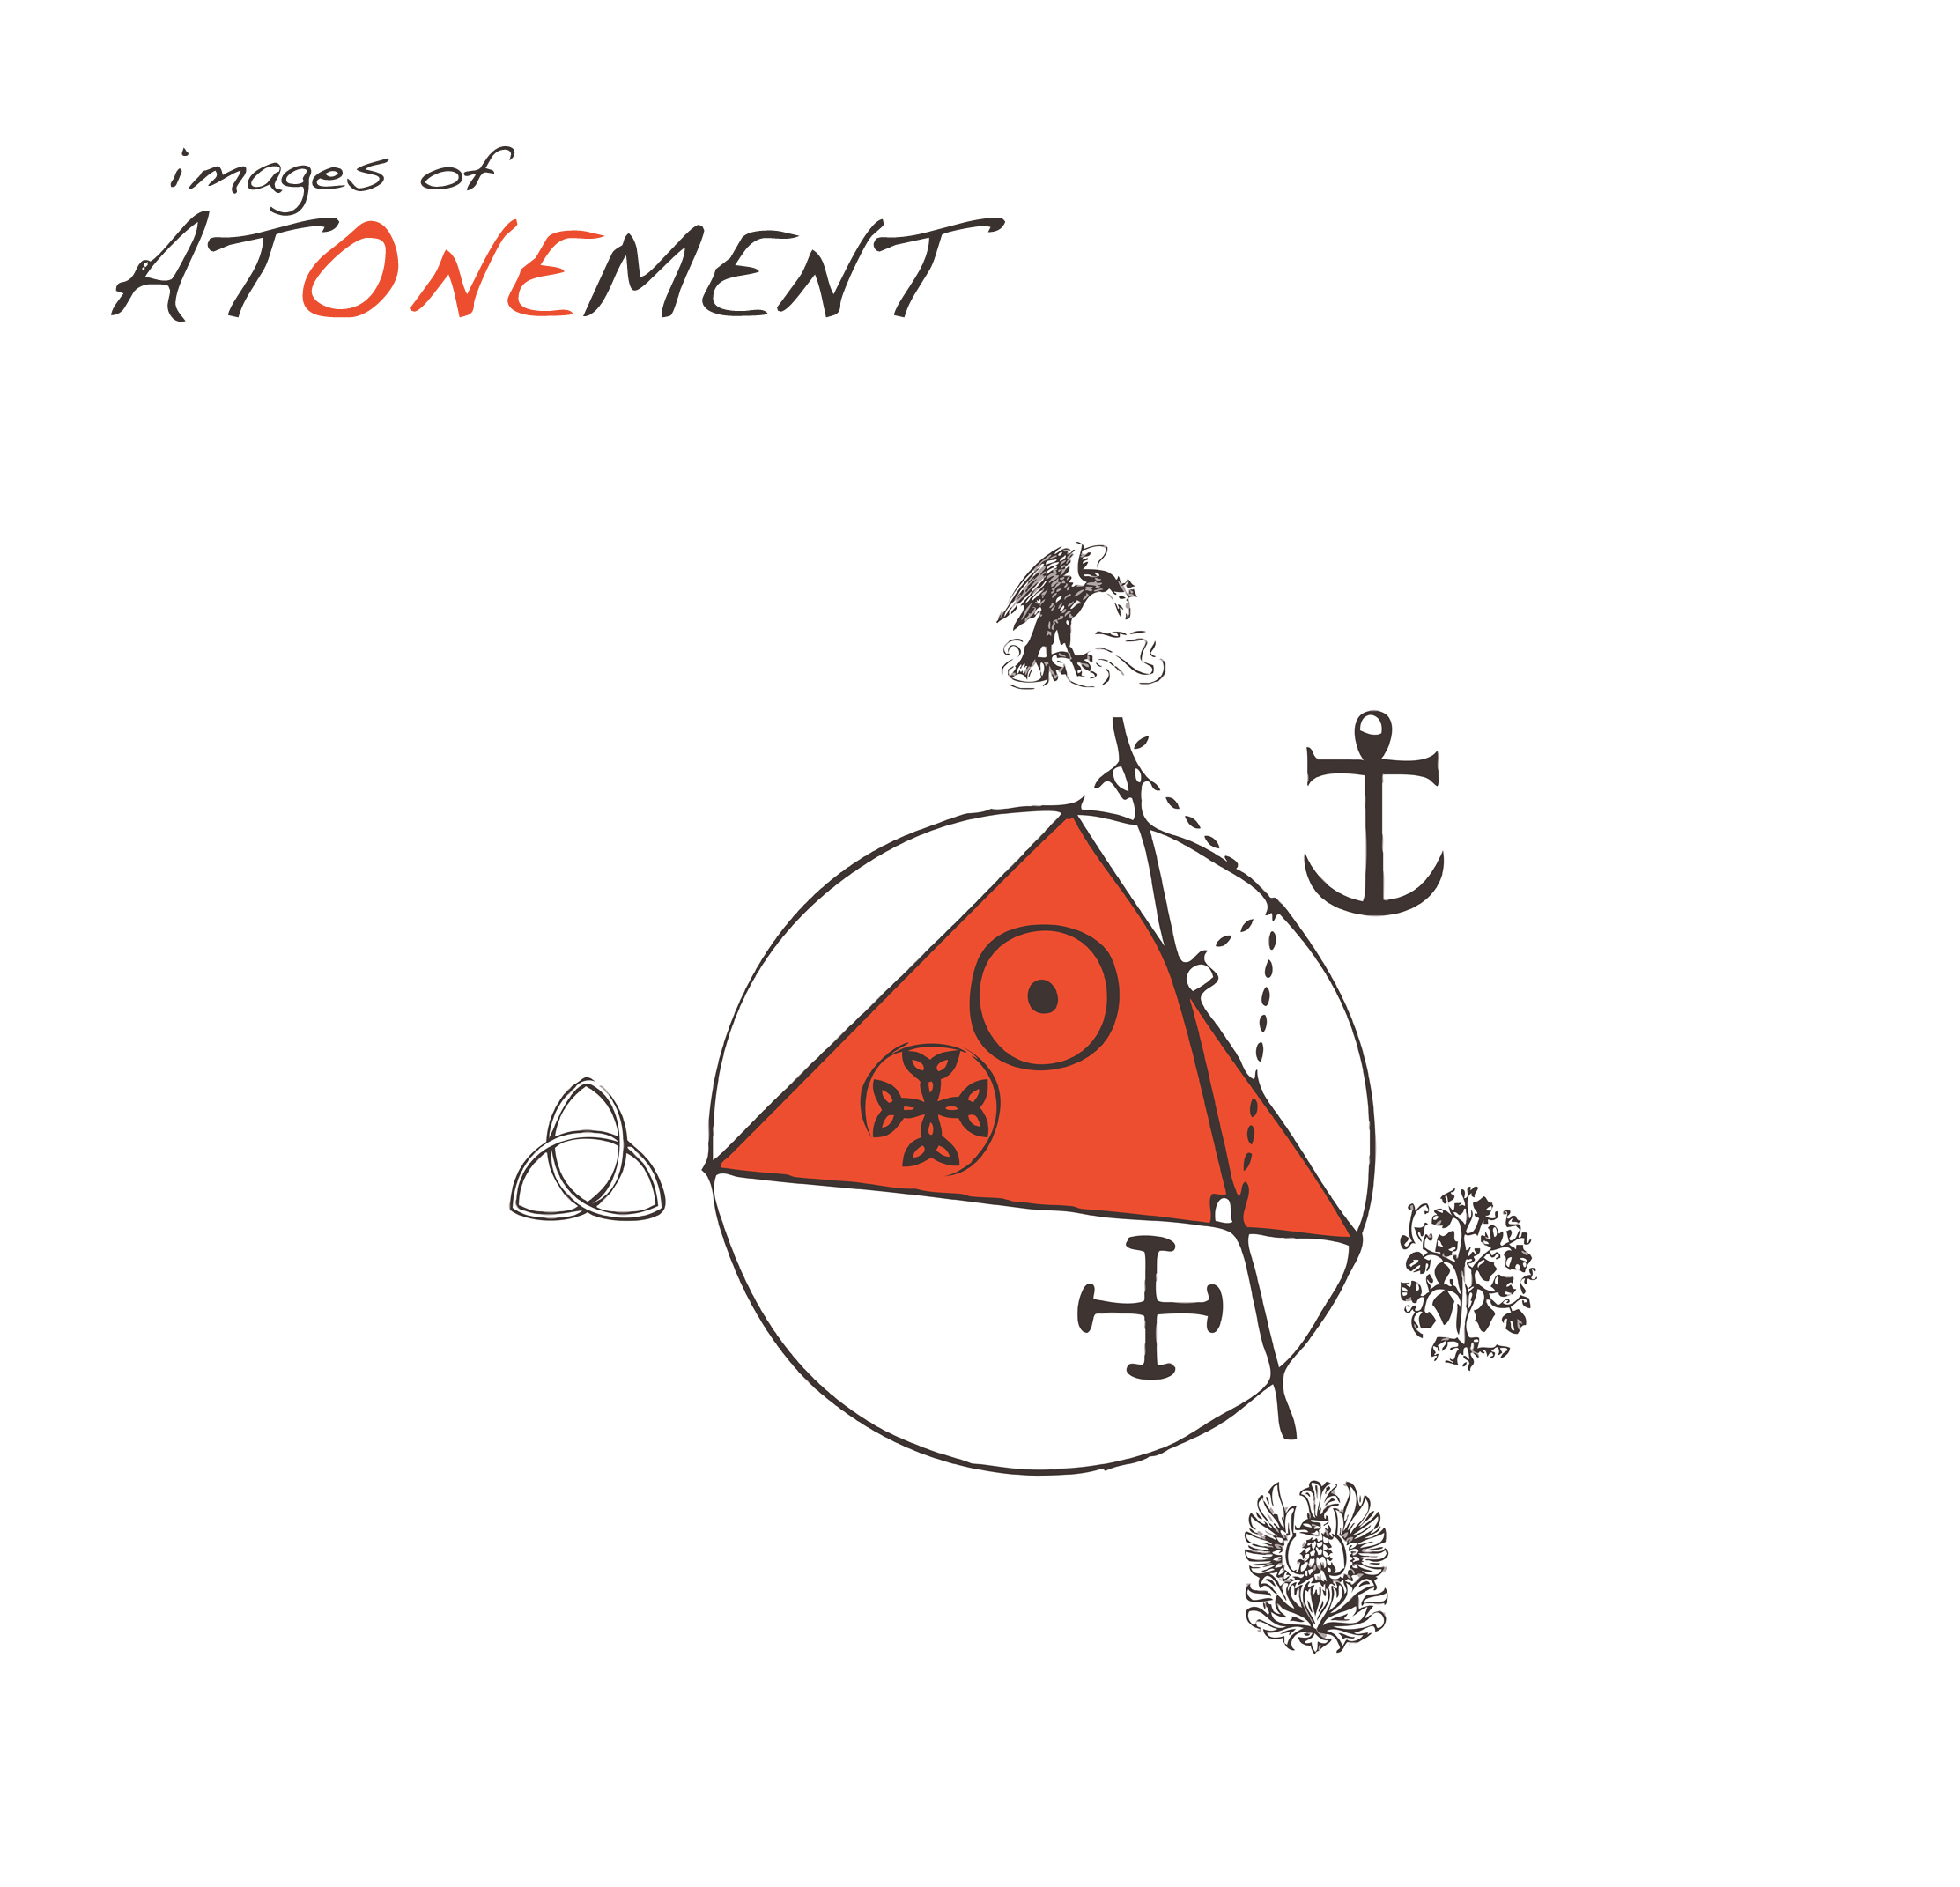 Artwork from Images of Atonement